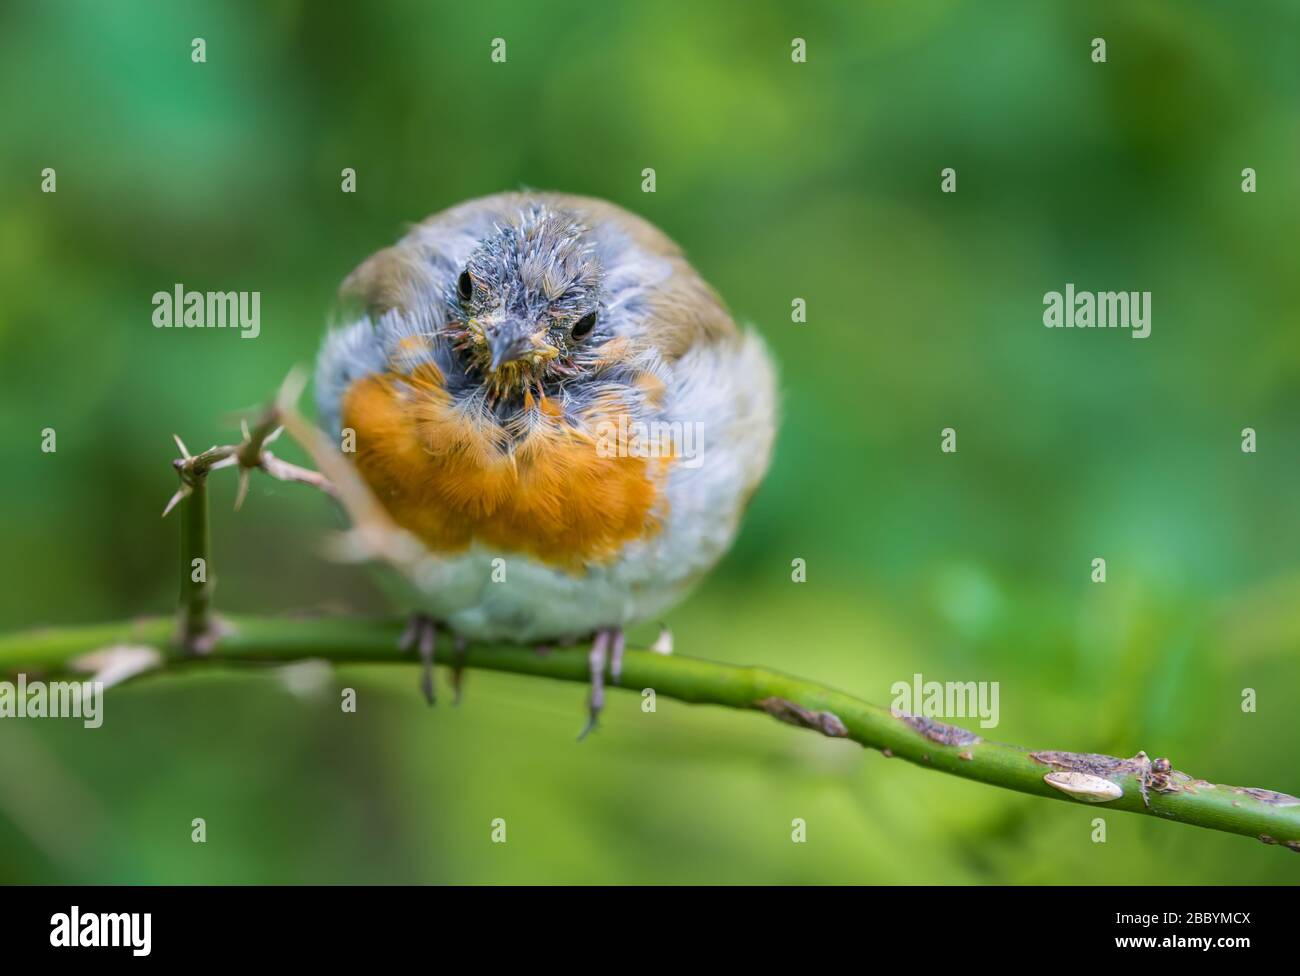 European Robin (Erithacus rubecula) in moult, perched on a twig in Summer in West Sussex, England, UK. Robin moulting, losing feathers. Bald Robin. Stock Photo